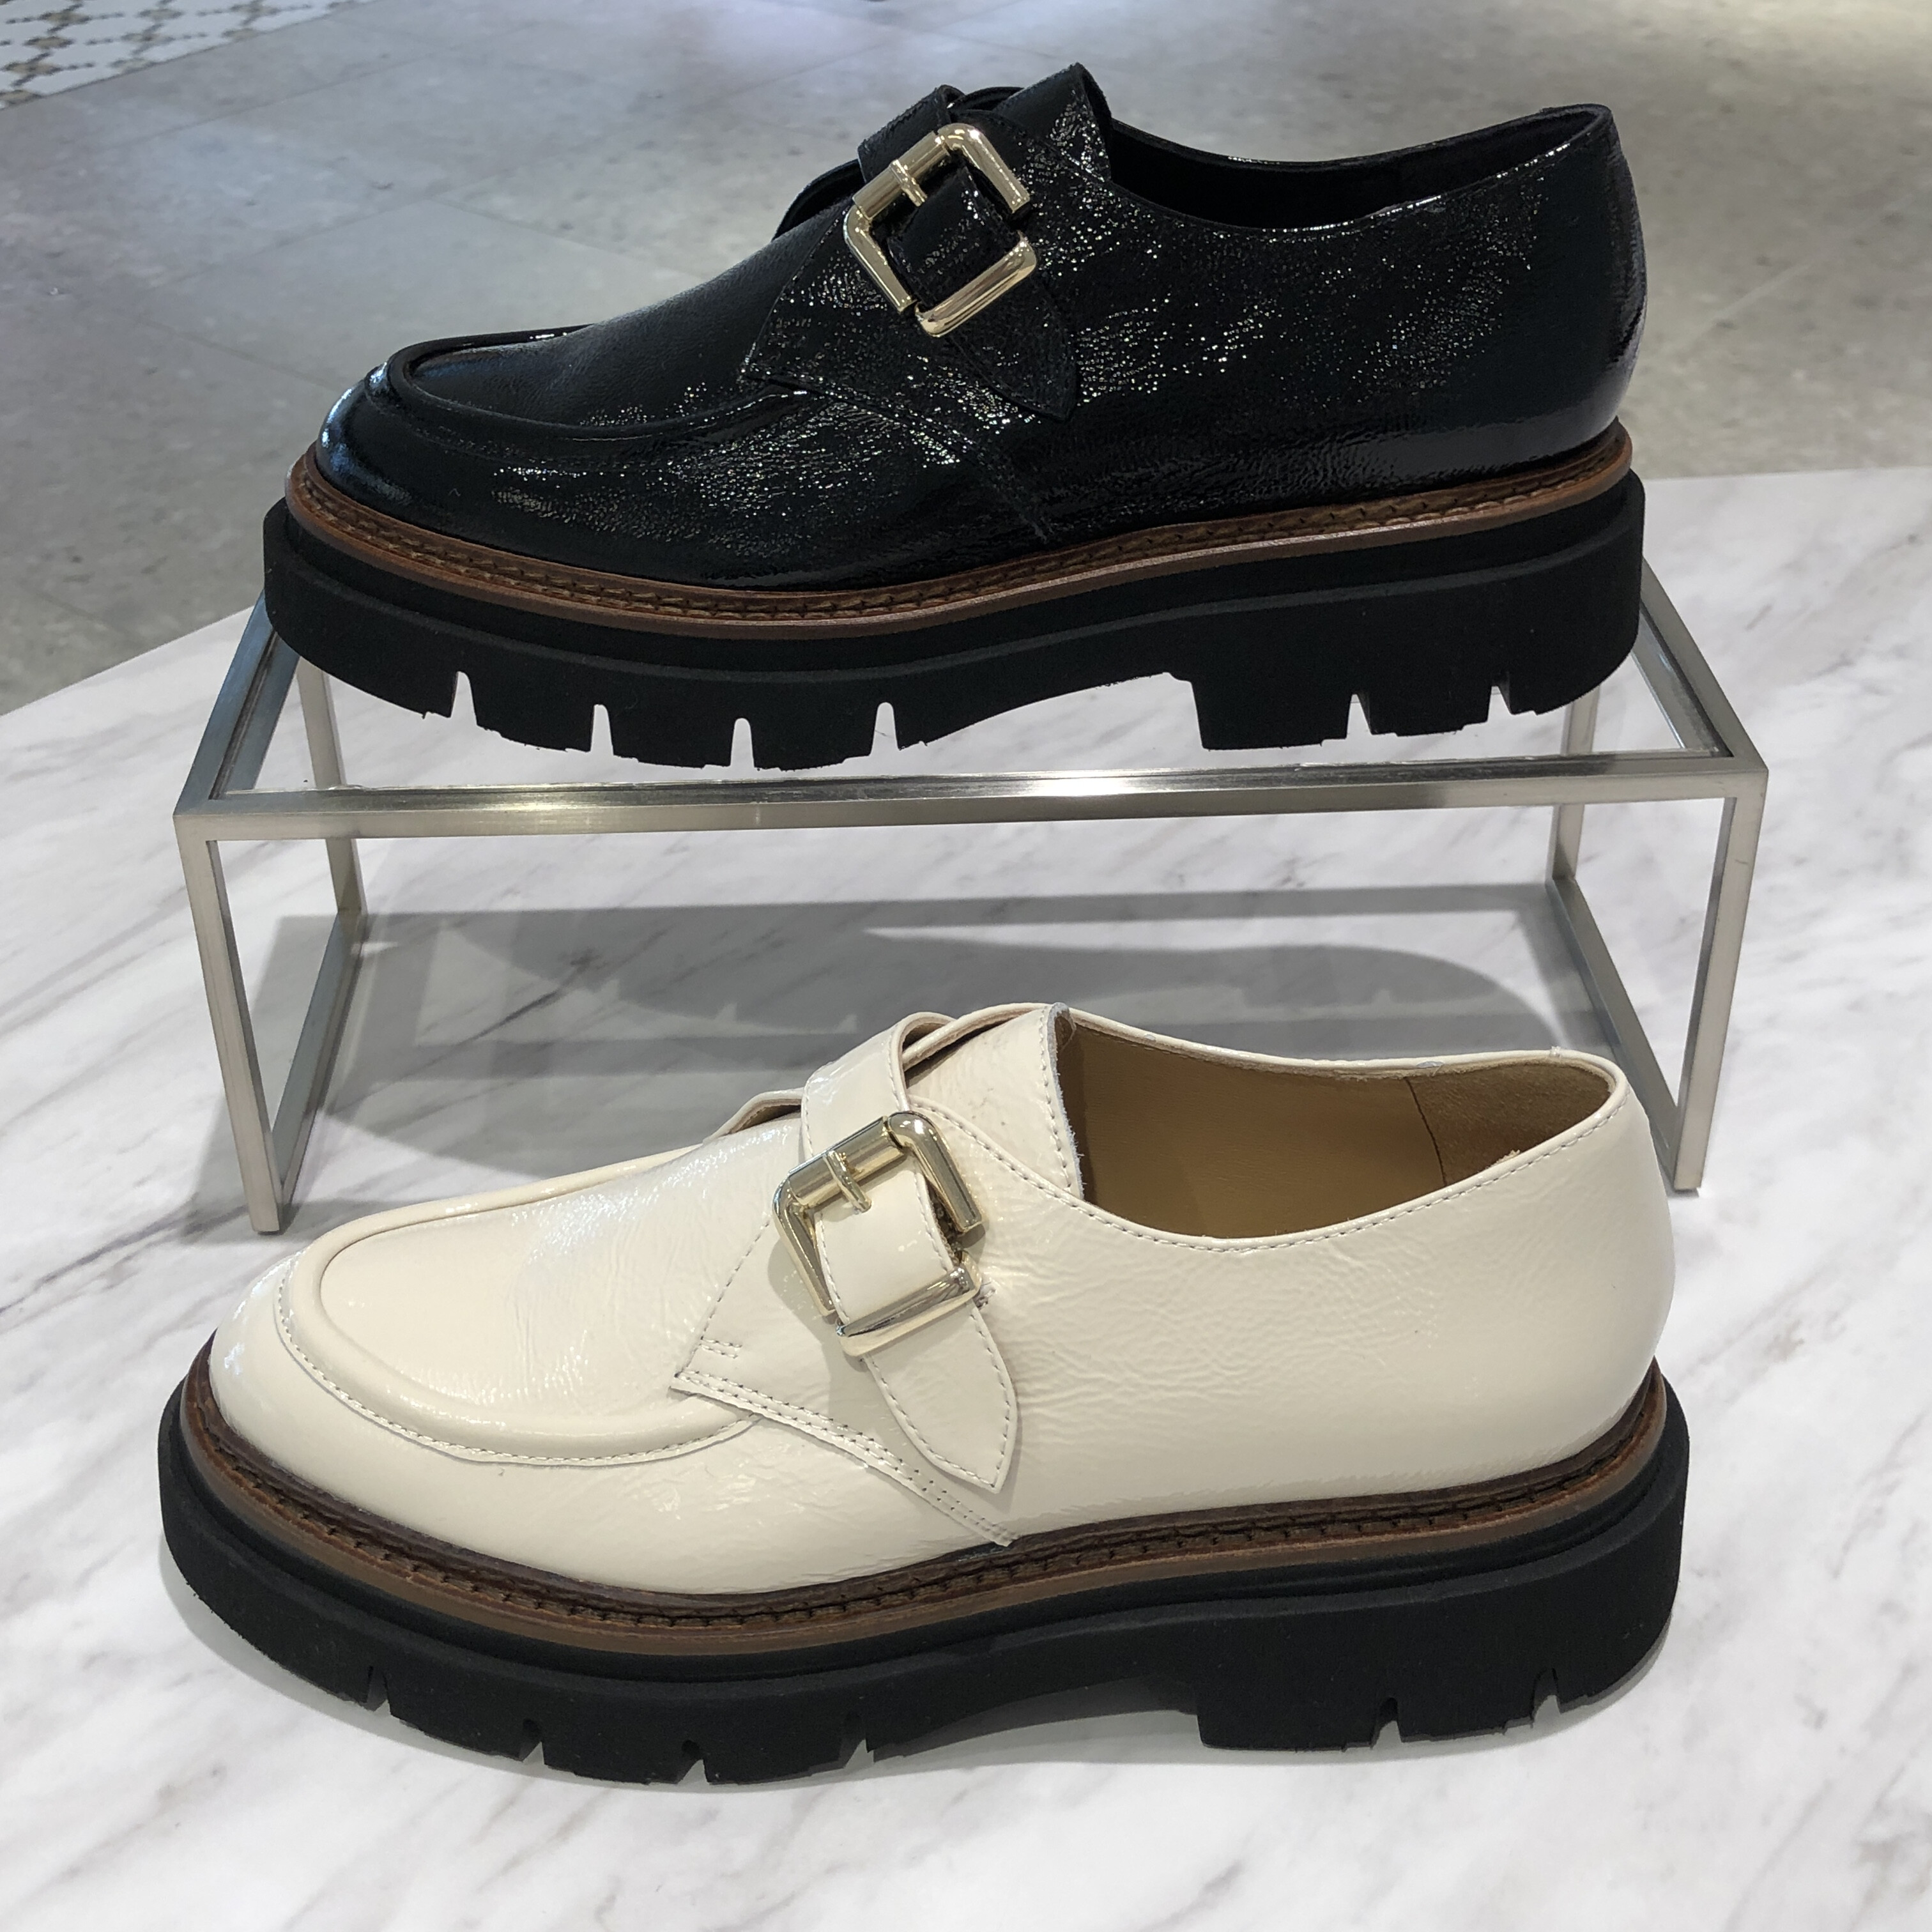 Q GOODS Parts&Shoes|〈Luca Grossi〉厚底ローファー入荷しました